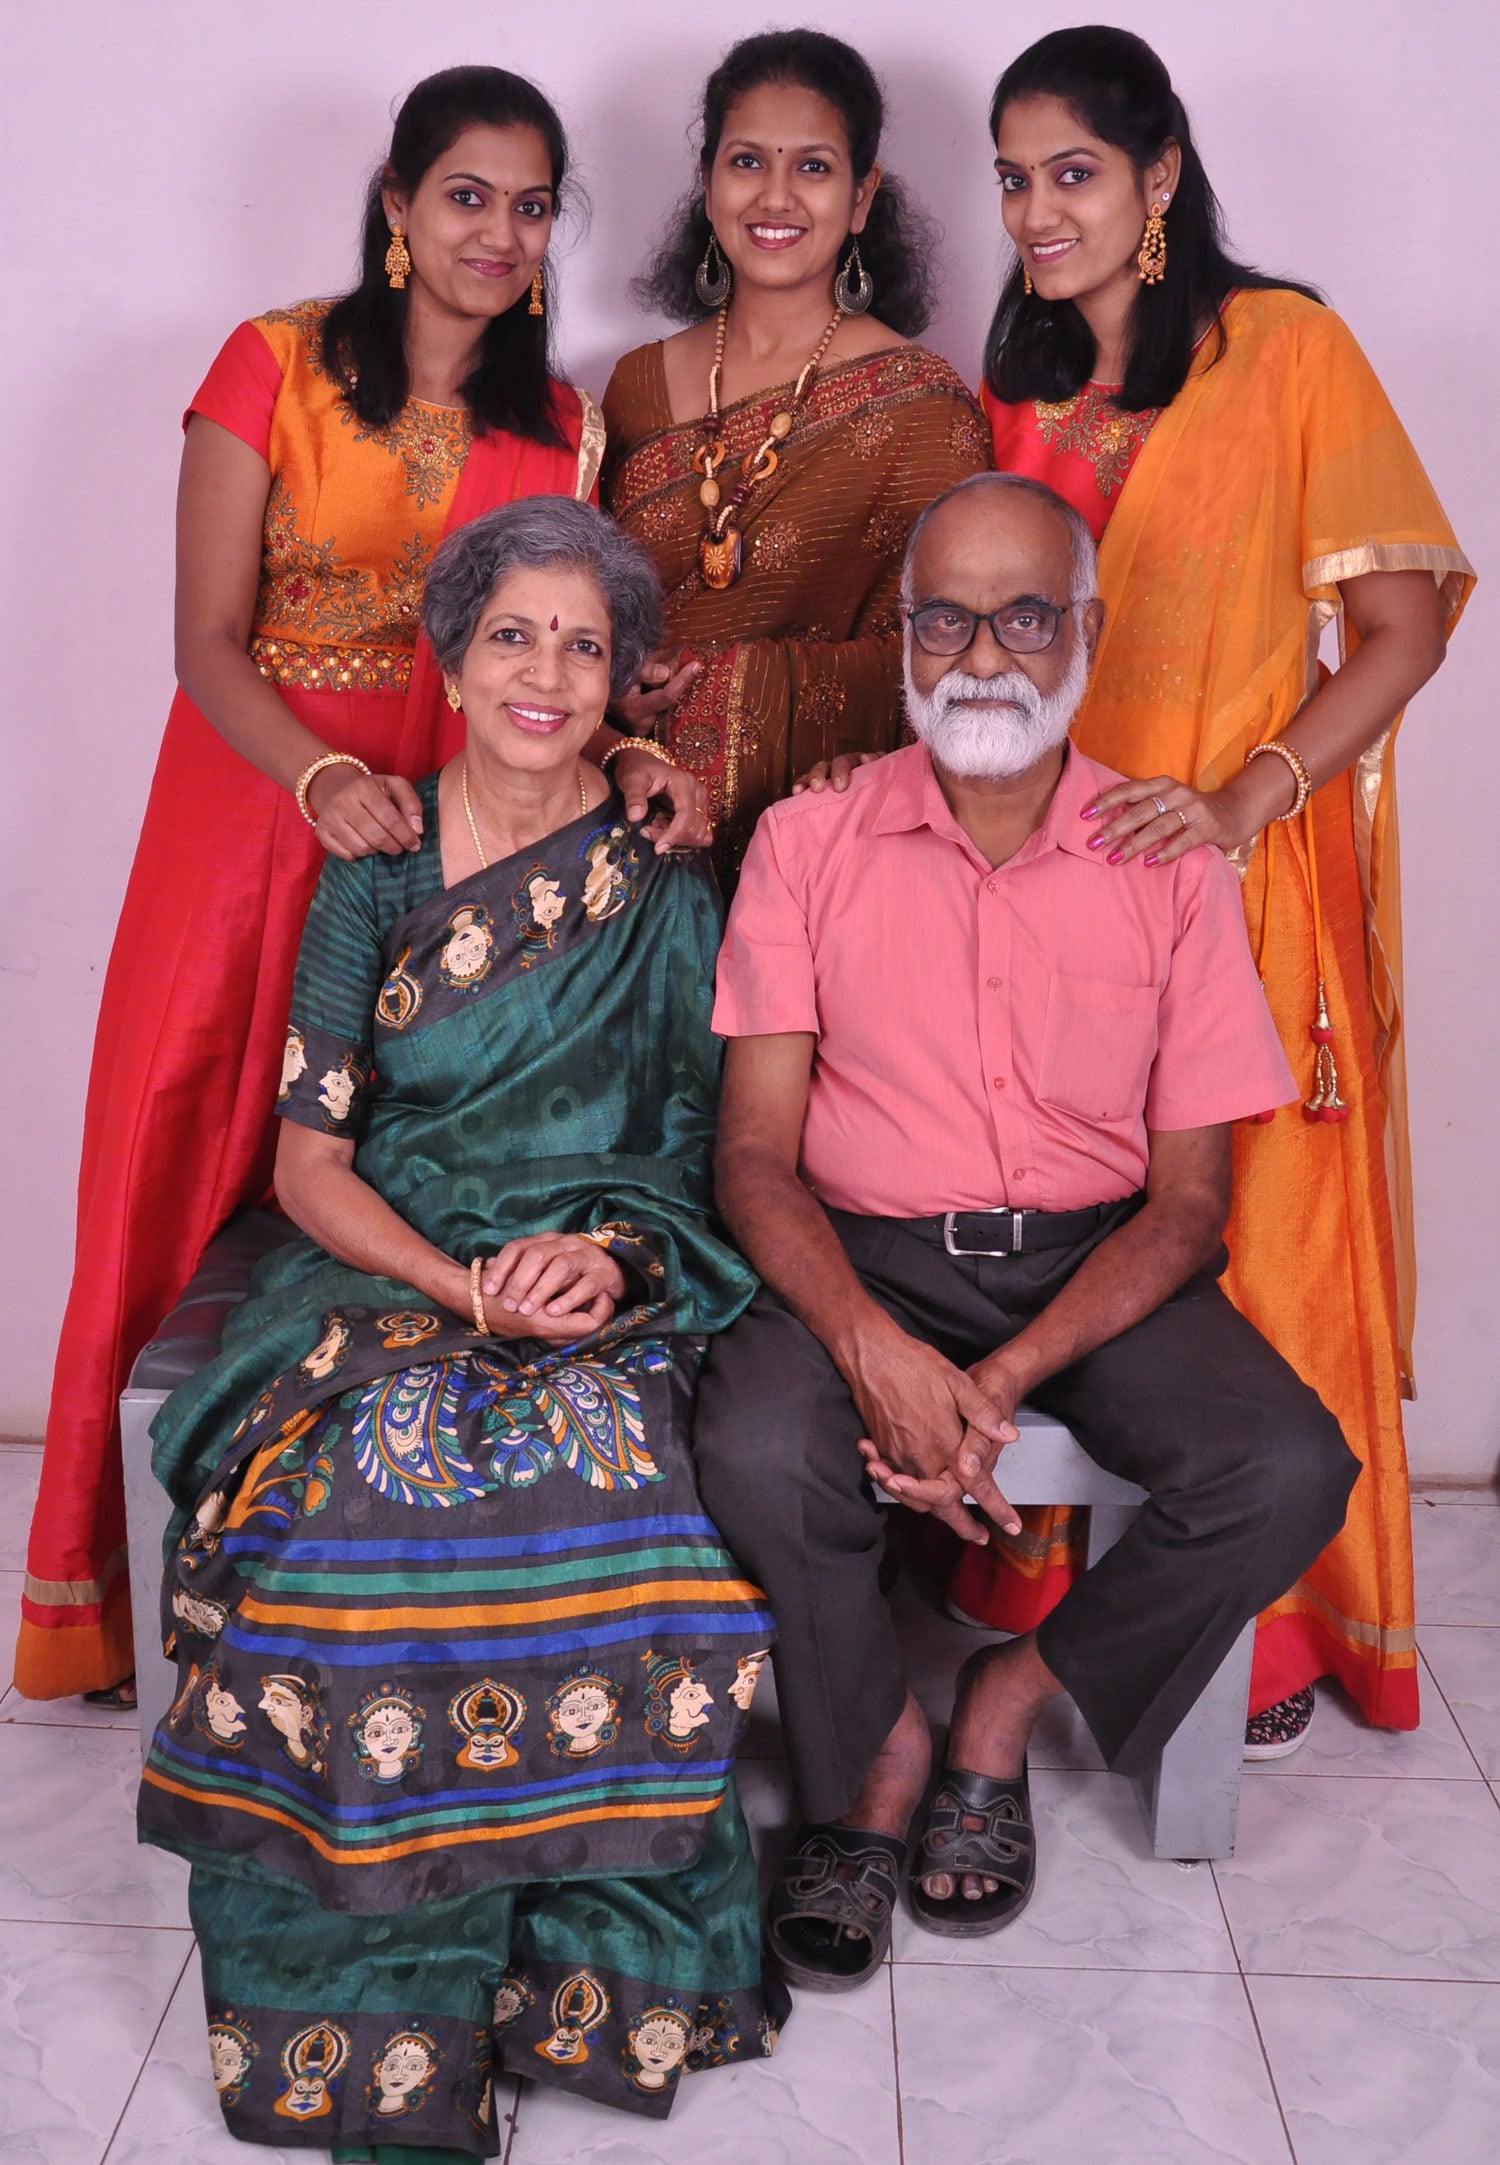 L-R: The twins with their sister Charumathy, father K.V. Jayaraman, and mother Jayam.